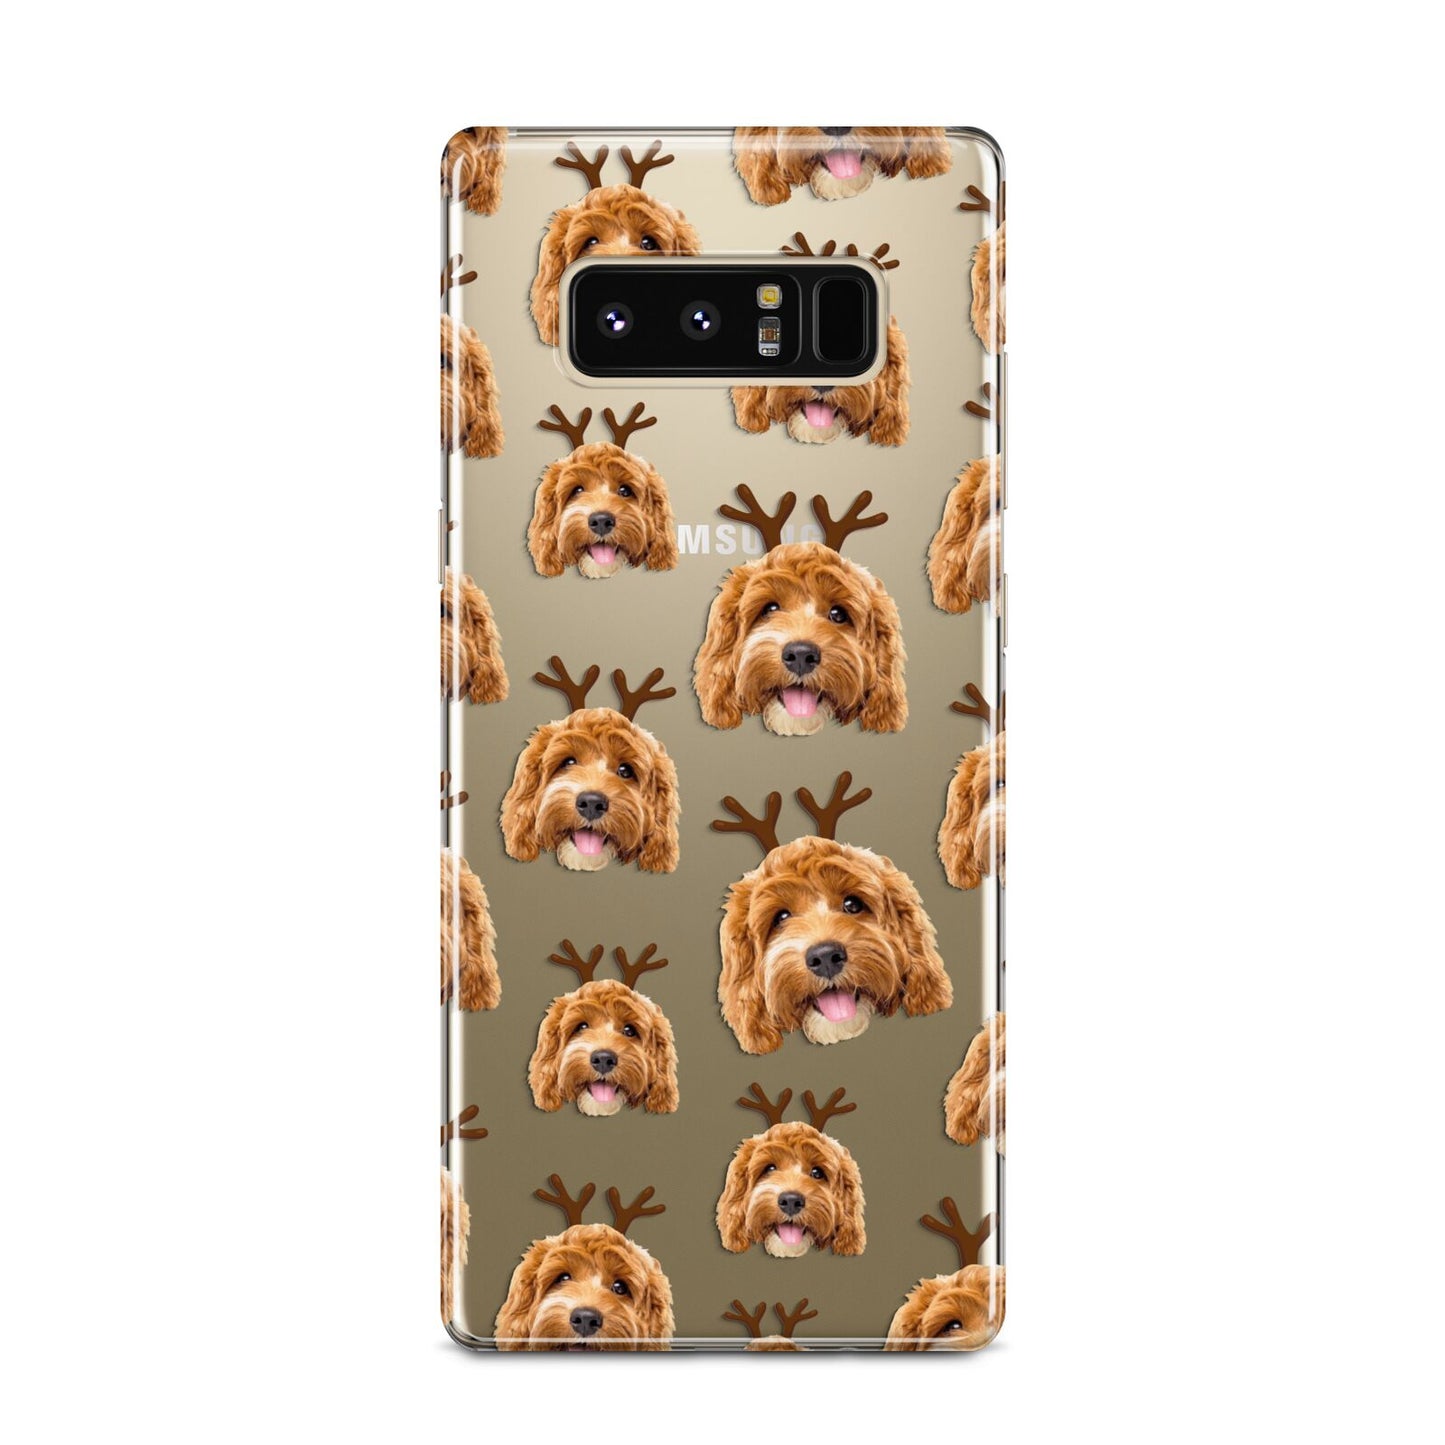 Personalised Christmas Dog Antler Samsung Galaxy Note 8 Case